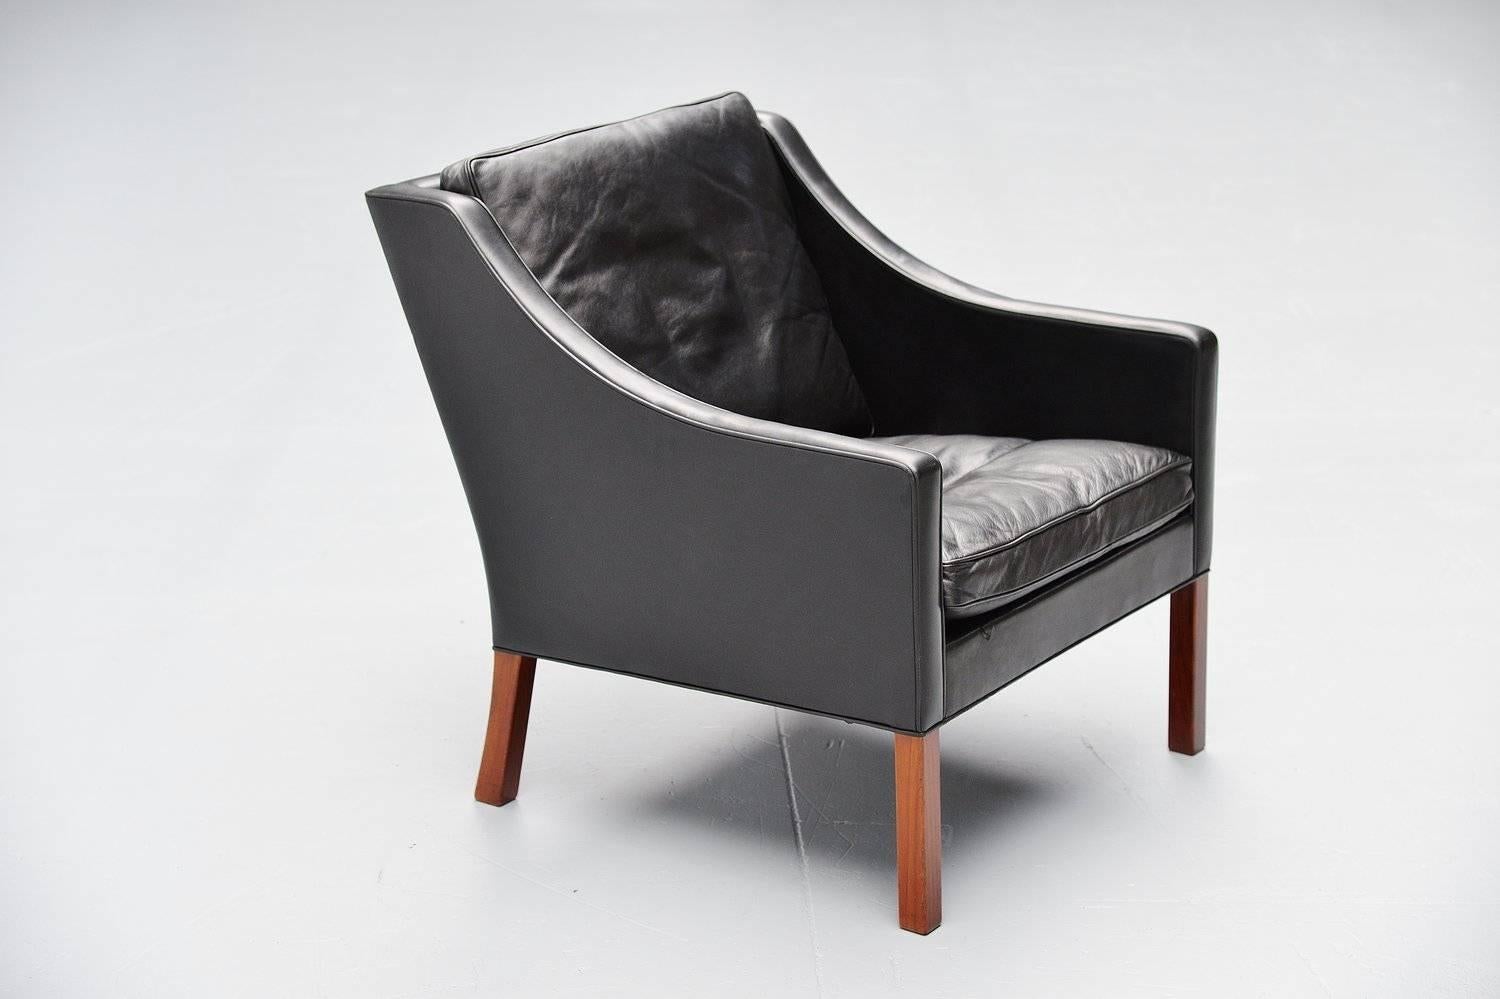 Leather Borge Mogensen Fredericia Lounge Chairs, Denmark, 1963